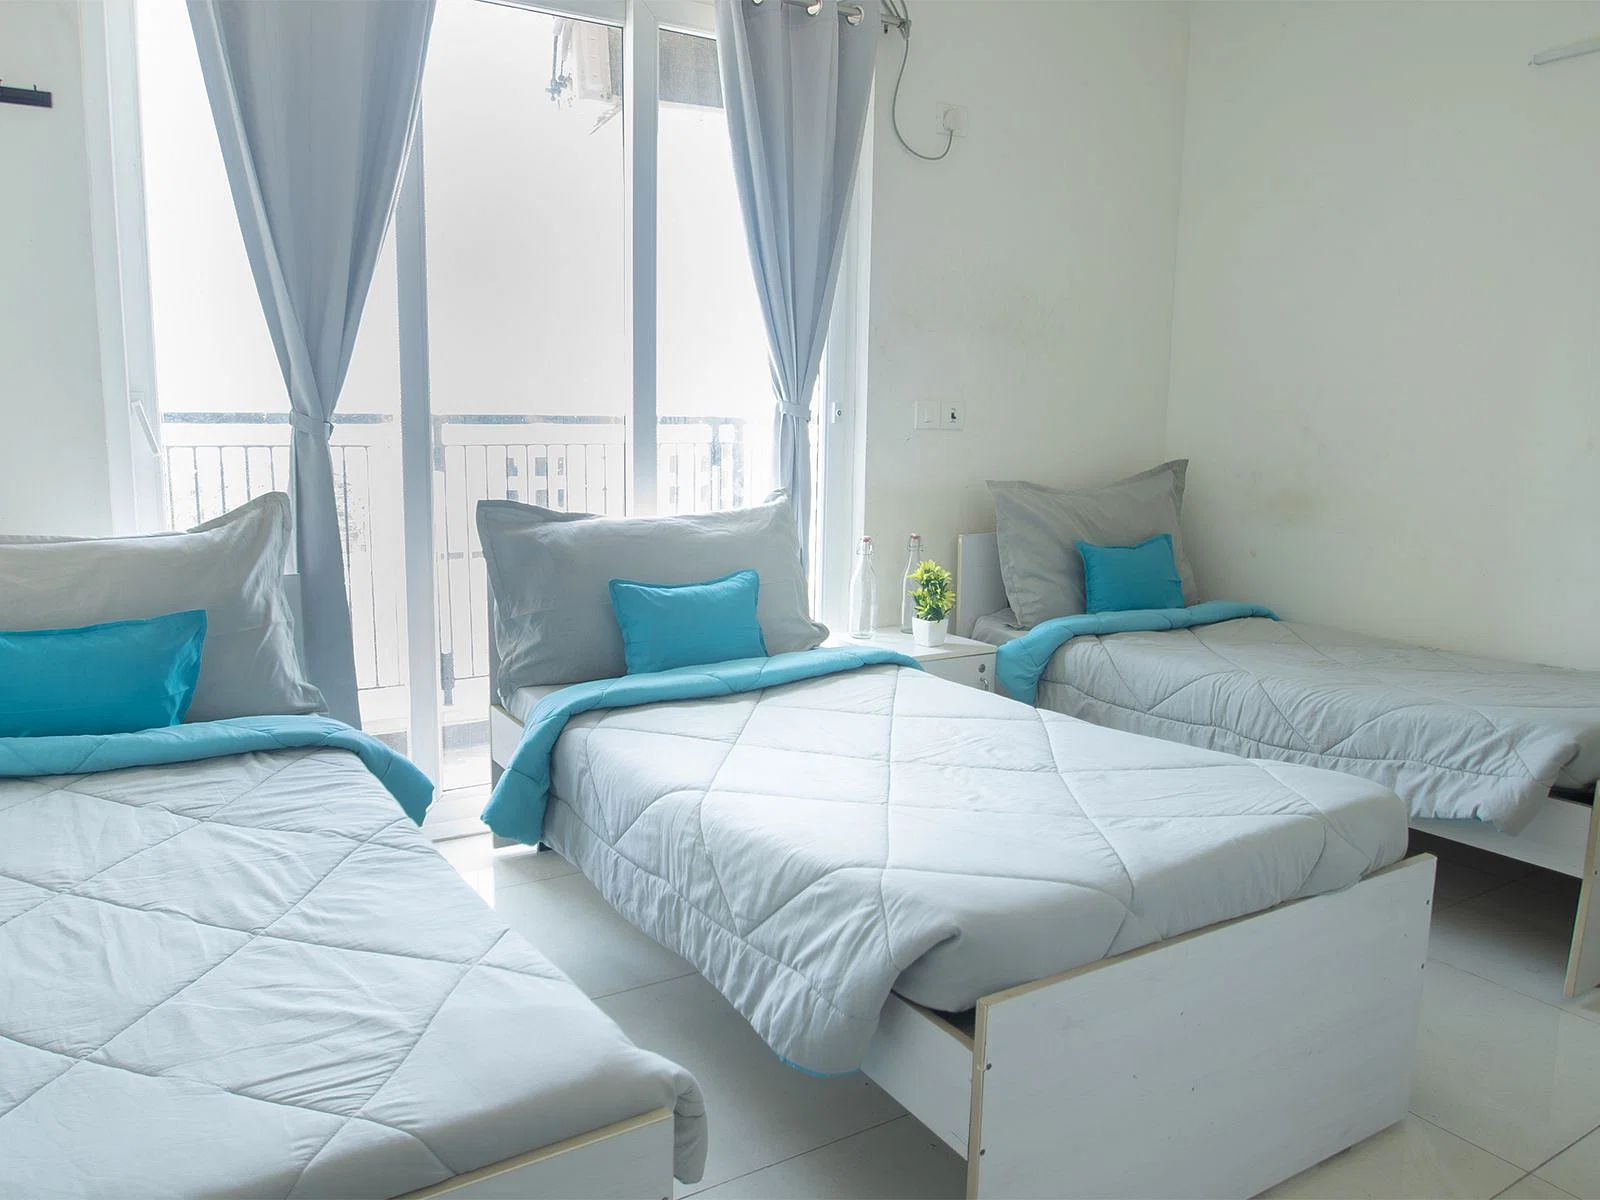 budget-friendly PGs and hostels for men and women with single rooms with daily hopusekeeping-Zolo Risington